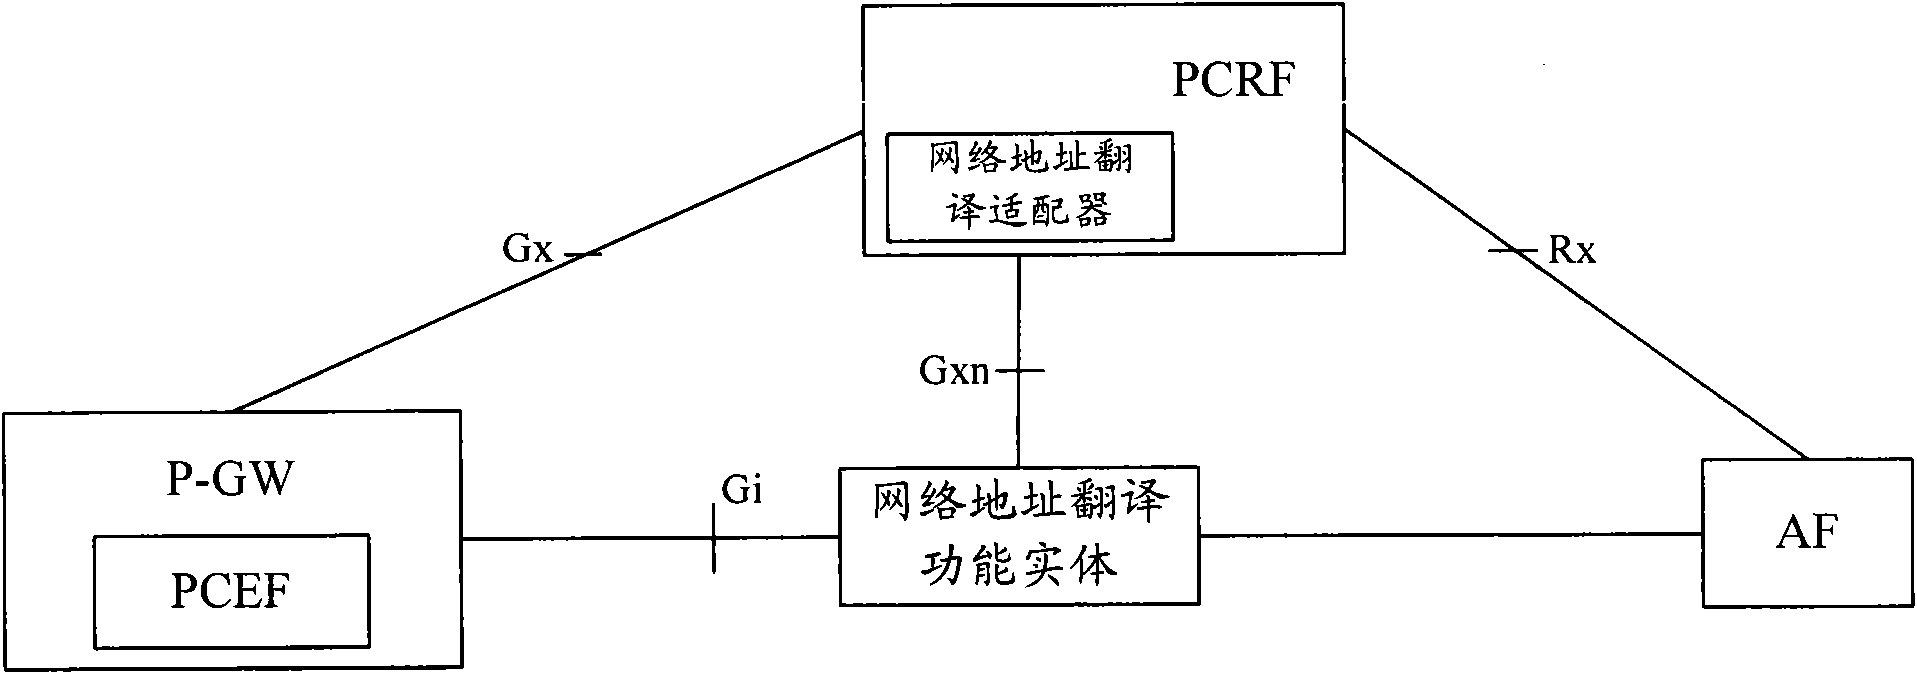 Method and system for sending out PCC (program-controlled computer) strategy information